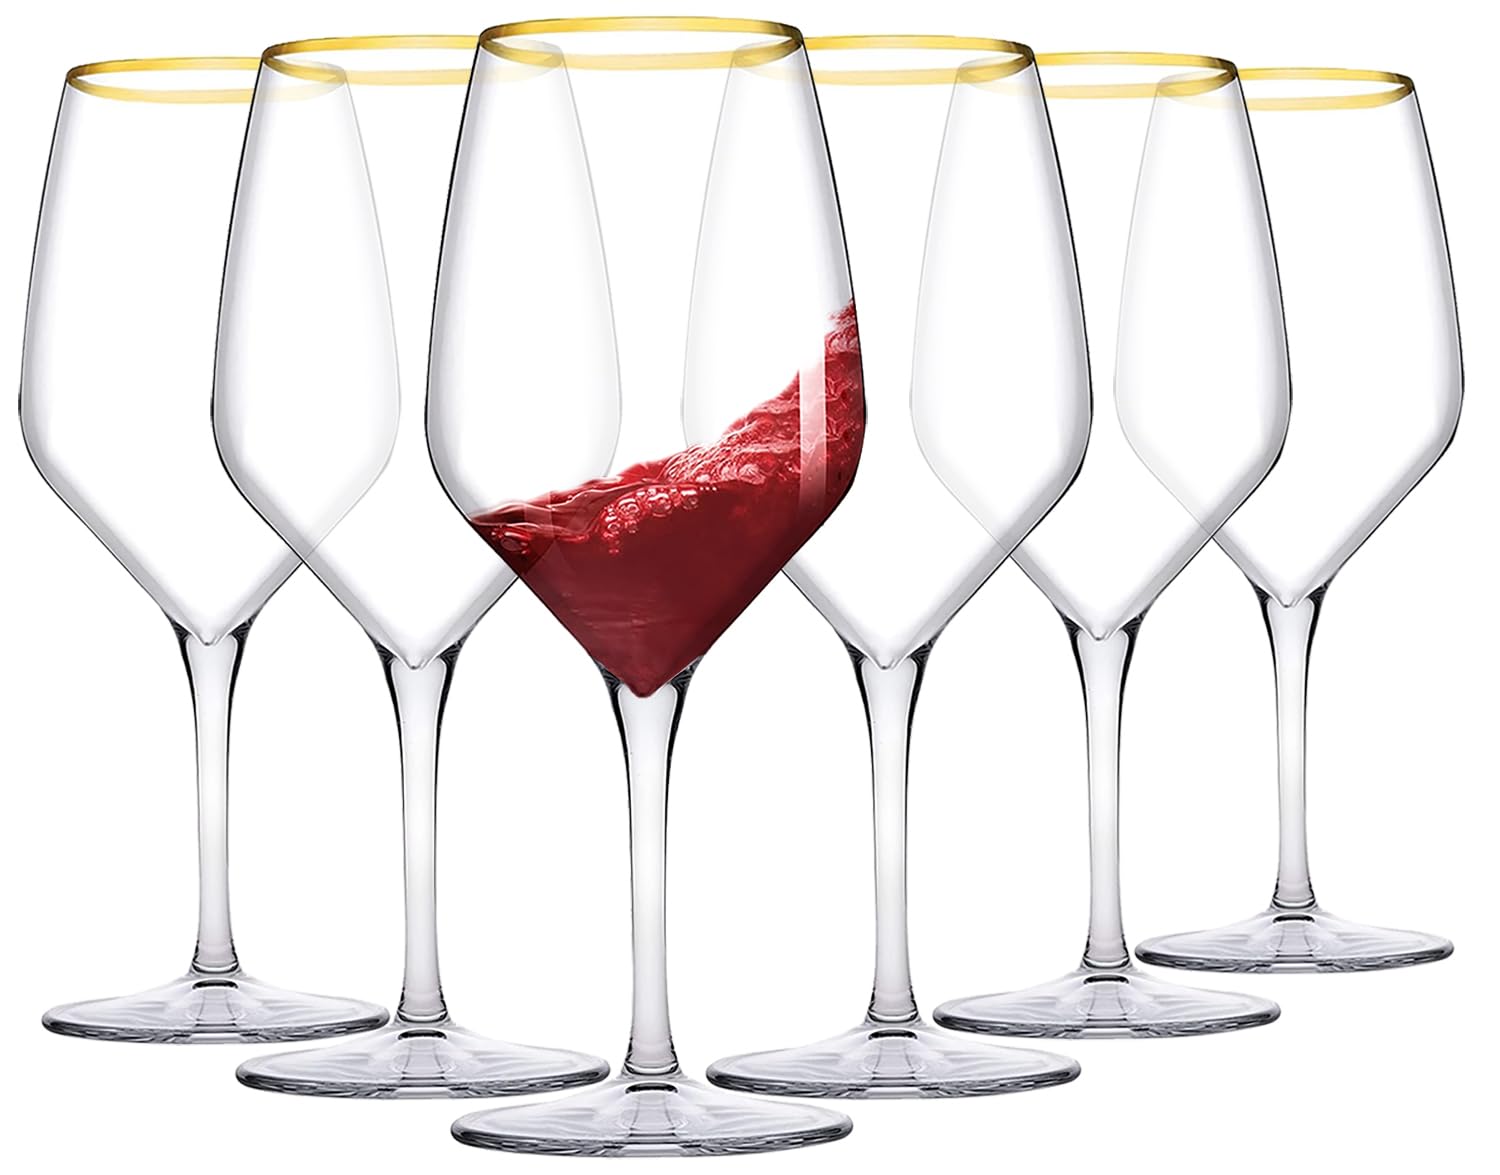 Biandeco Gold Rim Wine Glasses With Long Stem Set of 6, Laser-Cut Tempered Rim Crystal Clear Elegant Glassware for Drinking Wine, Sturdy Premium Blown Chalices, 15.9 oz